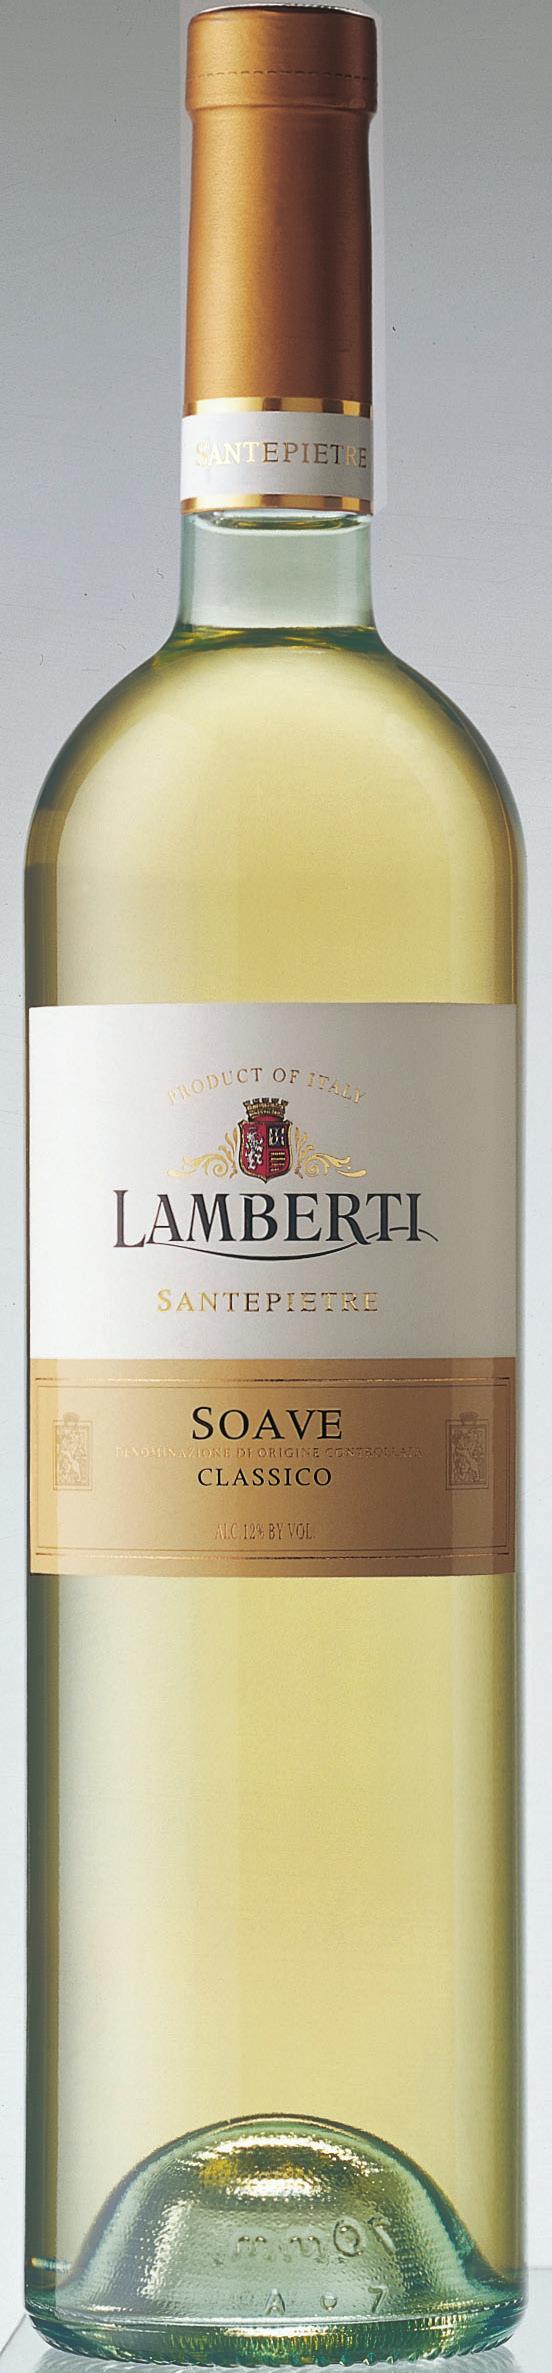 WINES Lamberti Santepietre Soave Classico DOC 2015 Italy Veneto Wine Introduction Selected parcels from the hills of Soave and Monteforte d Alpone, 300 metres above sea level in the Classico DOC